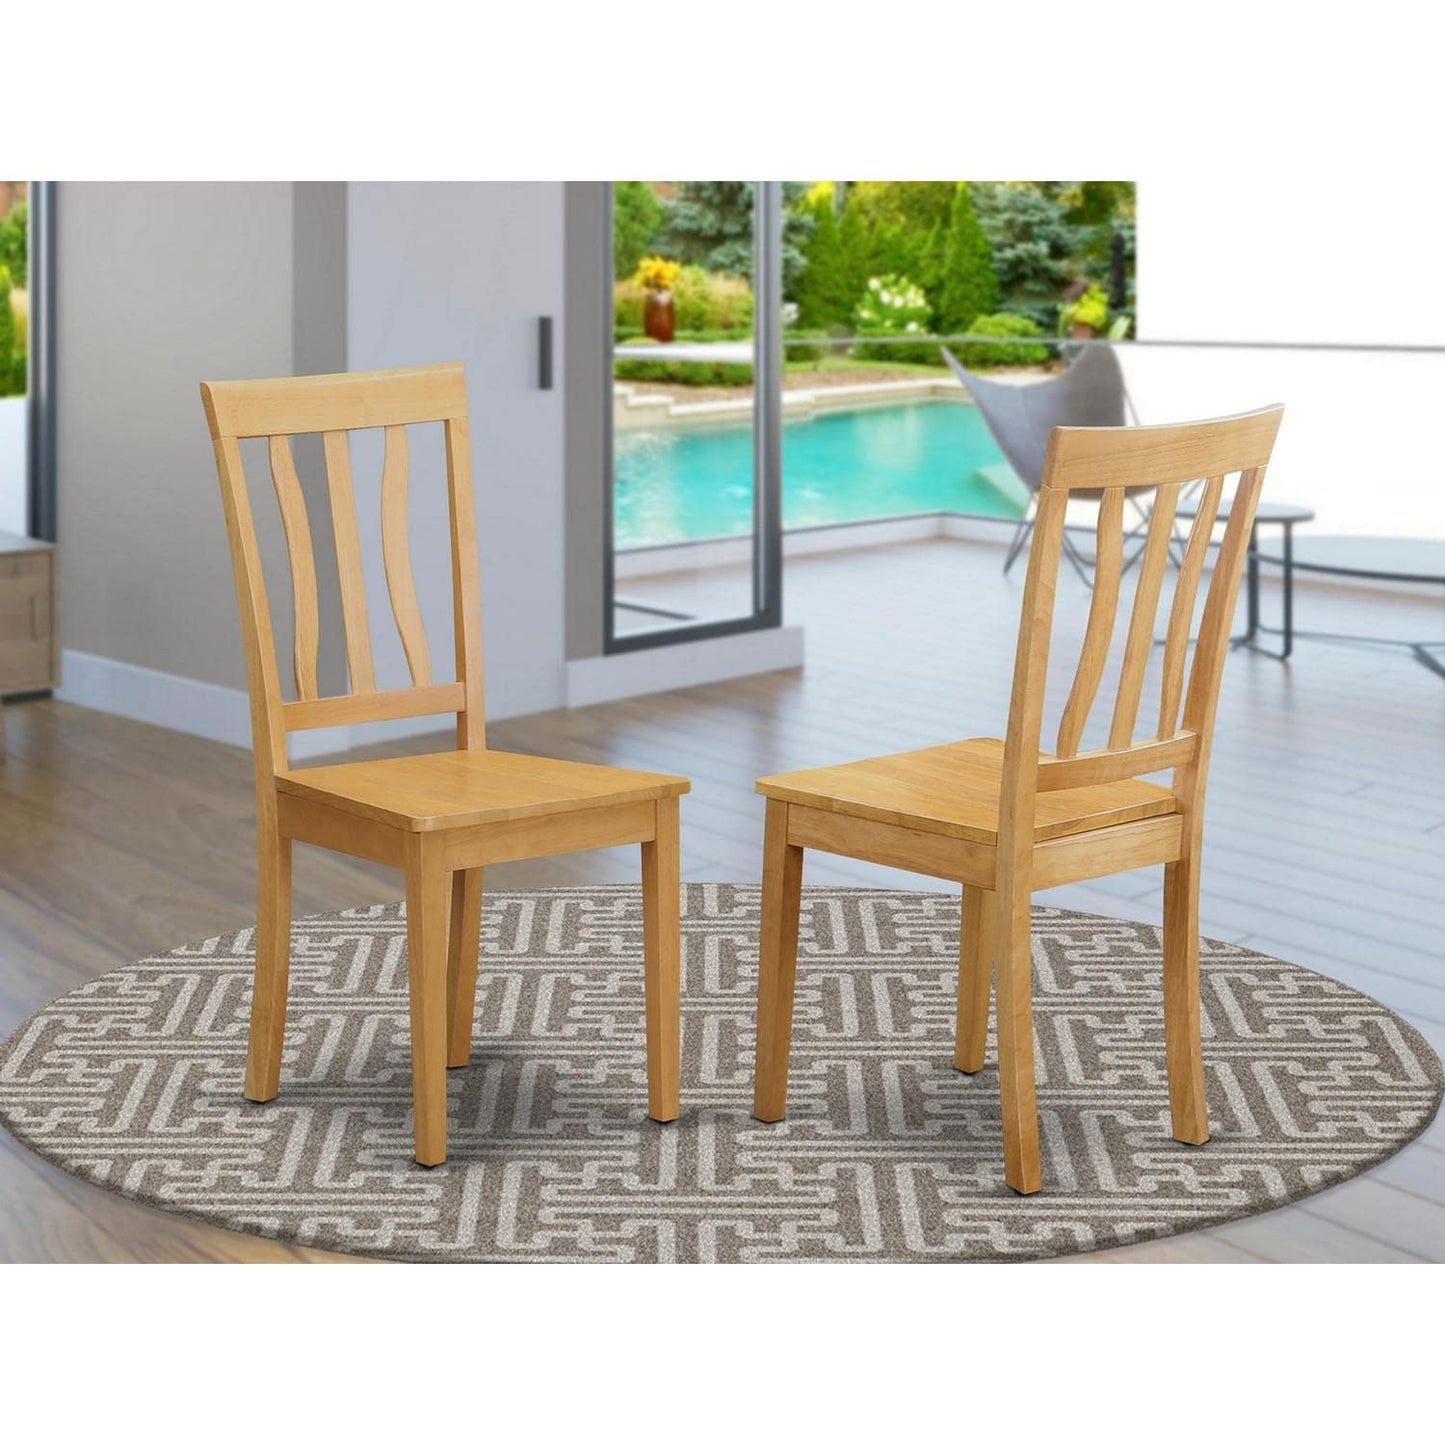 East West Furniture ANC-OAK-W Antique Dining Room Chairs - Slat Back Wooden Seat Chairs, Set of 2, Oak